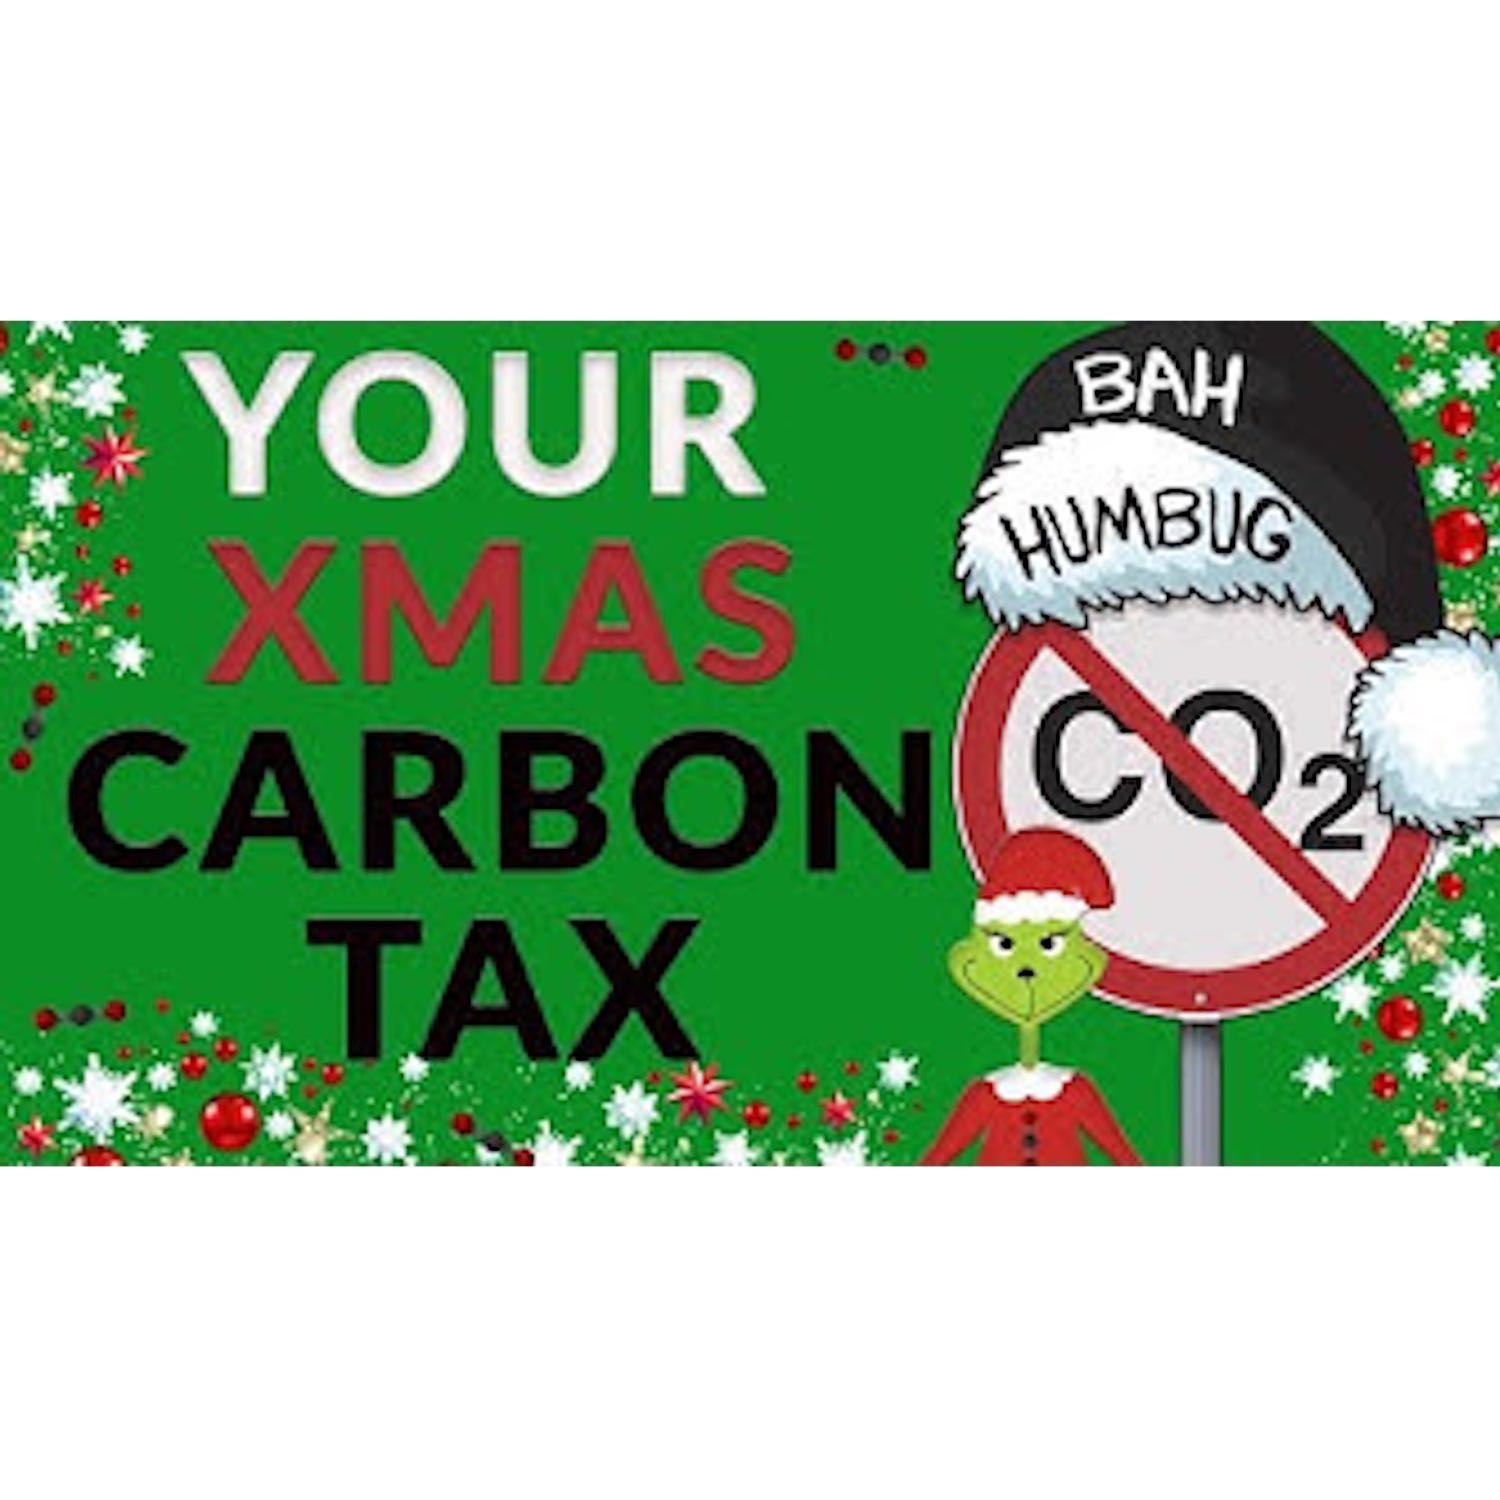 Merry Carbon Tax